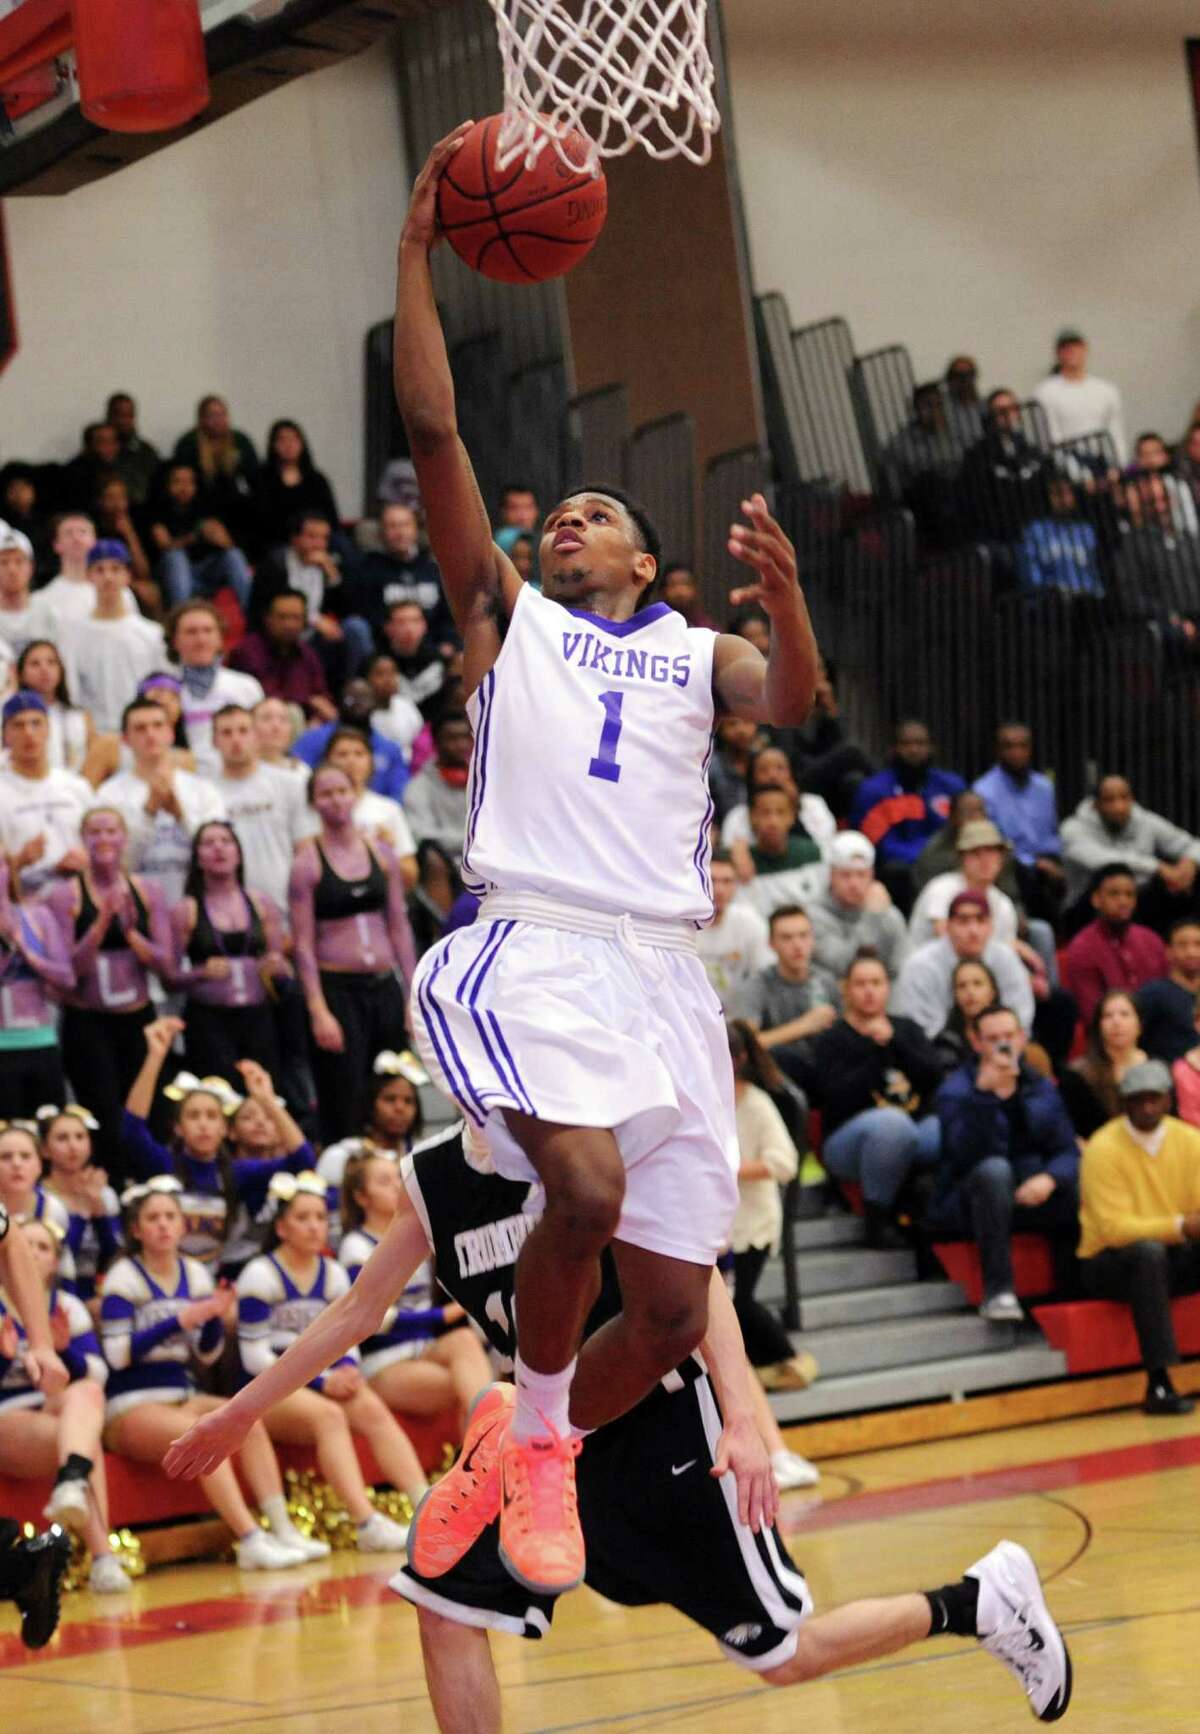 Westhill's Jeremiah Livingston puts up the ball Wednesday, Mar. 4, 2015 during the FCIAC semi-final game against Trumbull at Fairfield Warde High School in Fairfield, Conn.